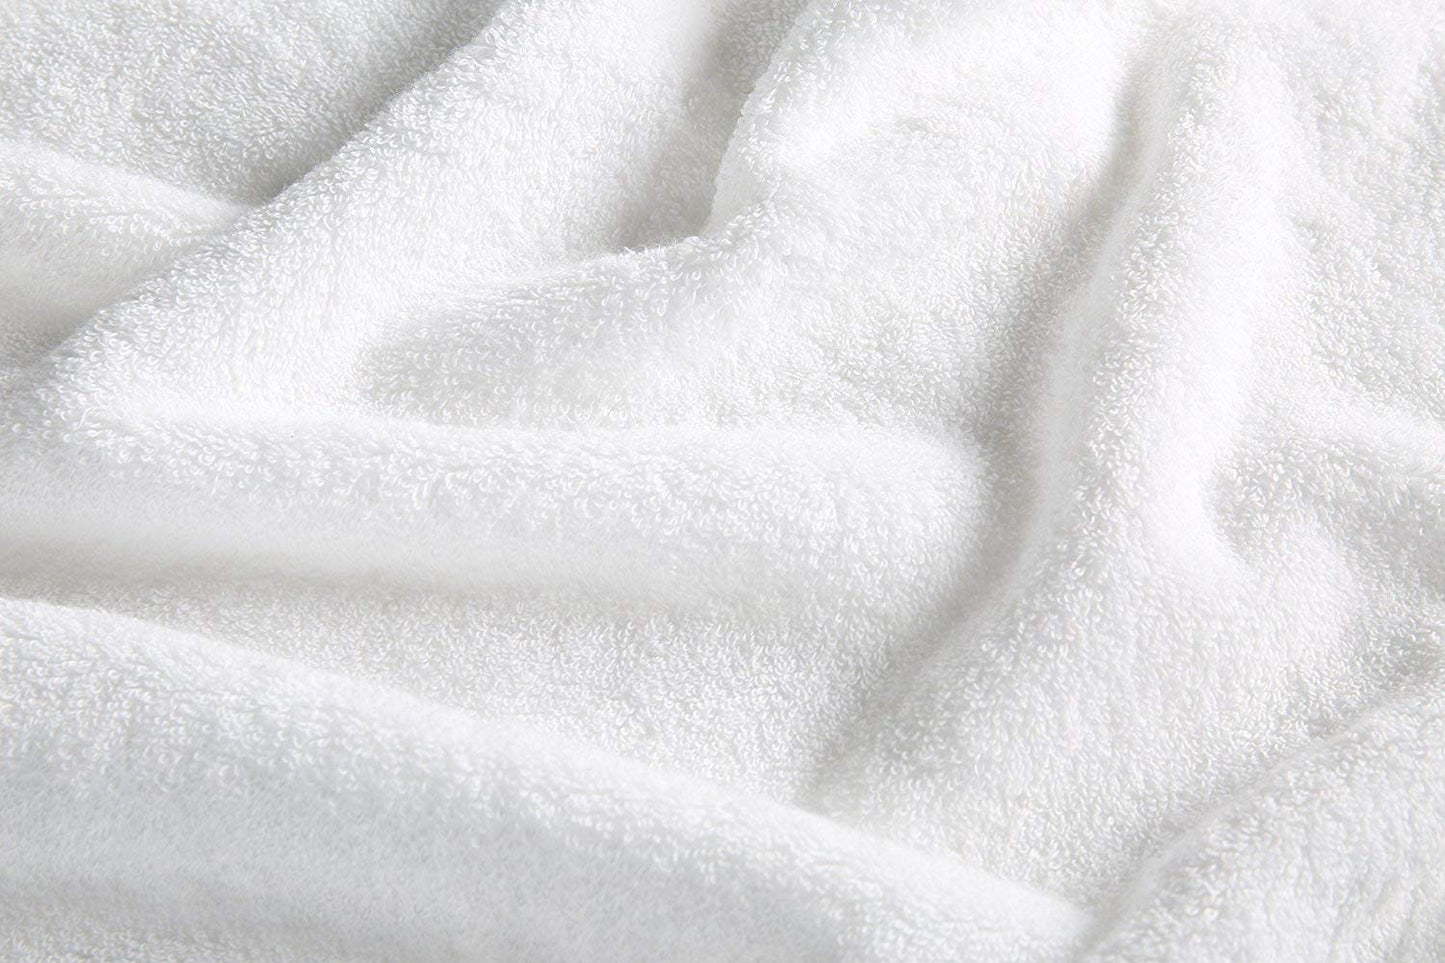 Wealuxe Cotton Bath Towels - 6 Pack of White Towels